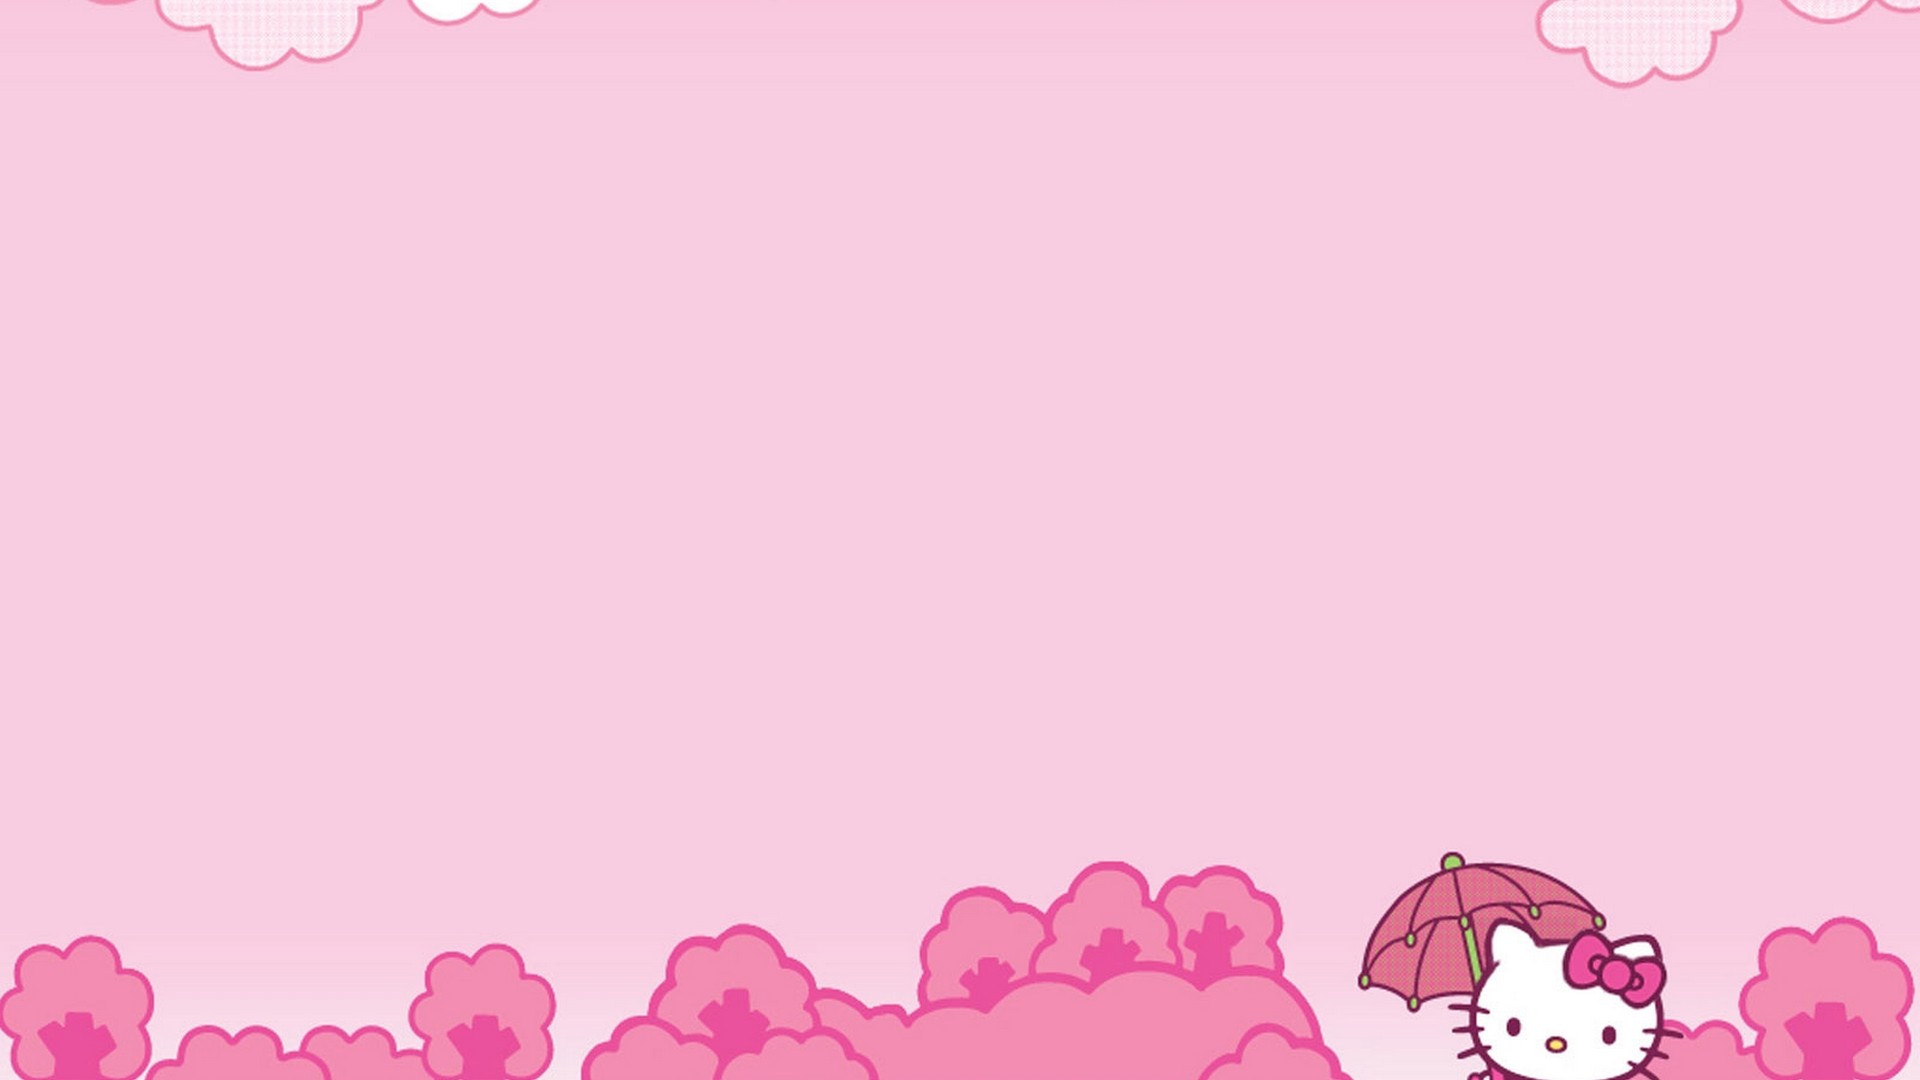 Wallpaper Hello Kitty Images HD With Resolution 1920X1080 pixel. You can make this wallpaper for your Desktop Computer Backgrounds, Mac Wallpapers, Android Lock screen or iPhone Screensavers